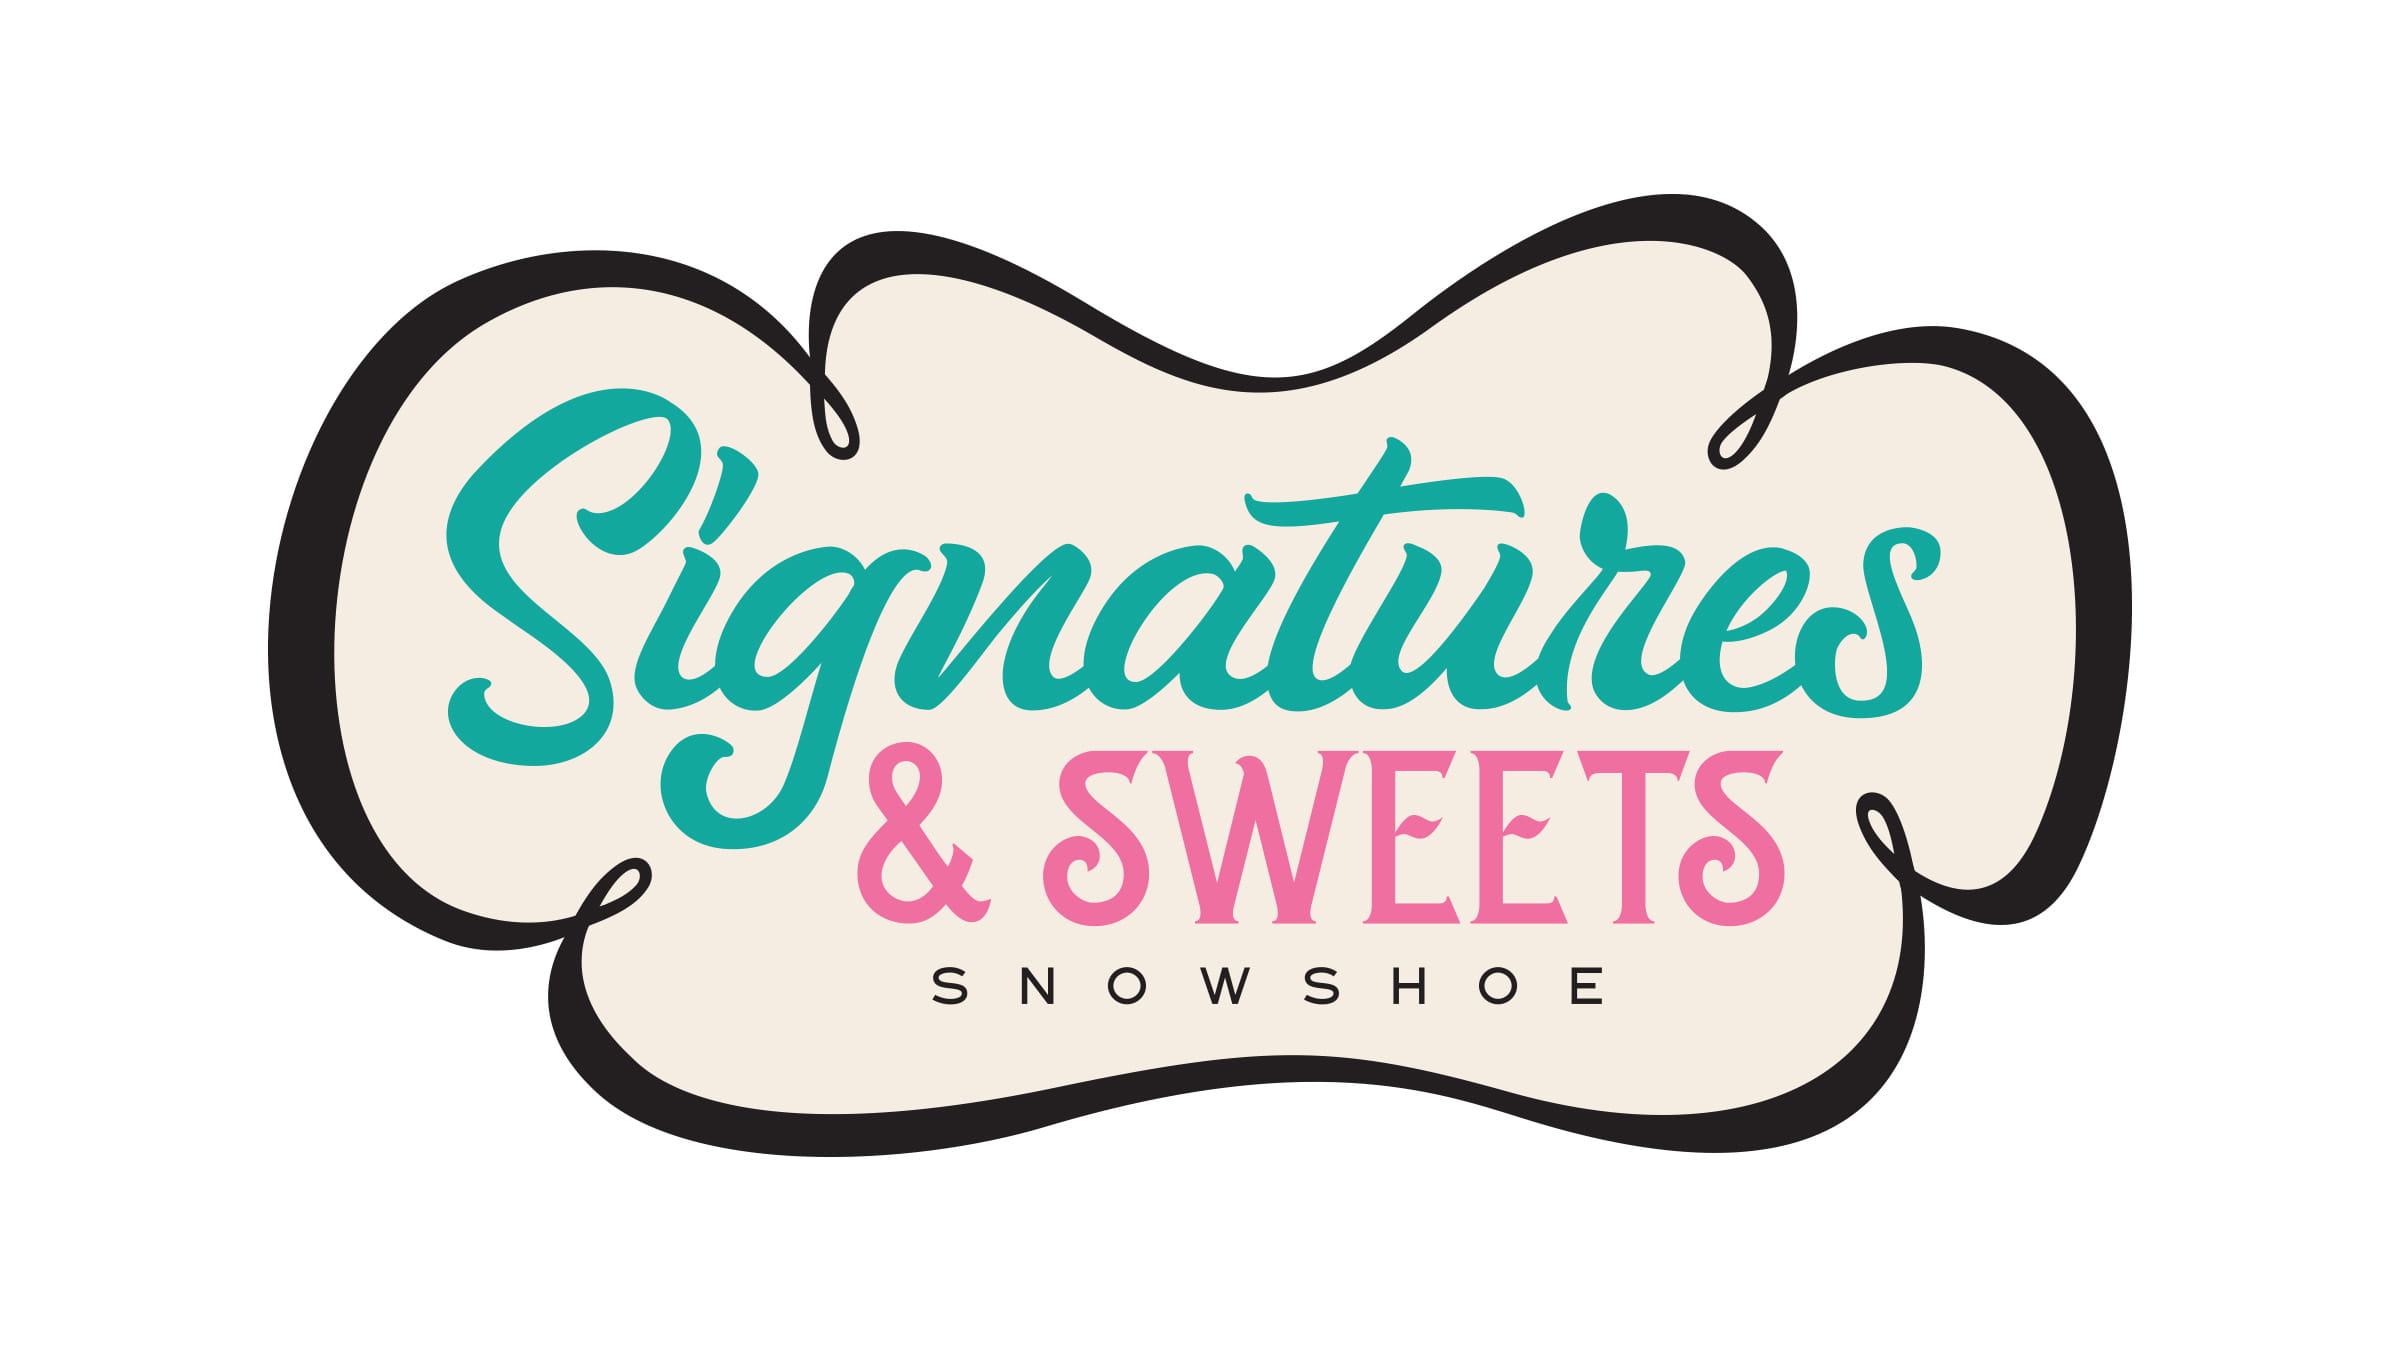 Signatures & Sweets of Snowshoe Mountain